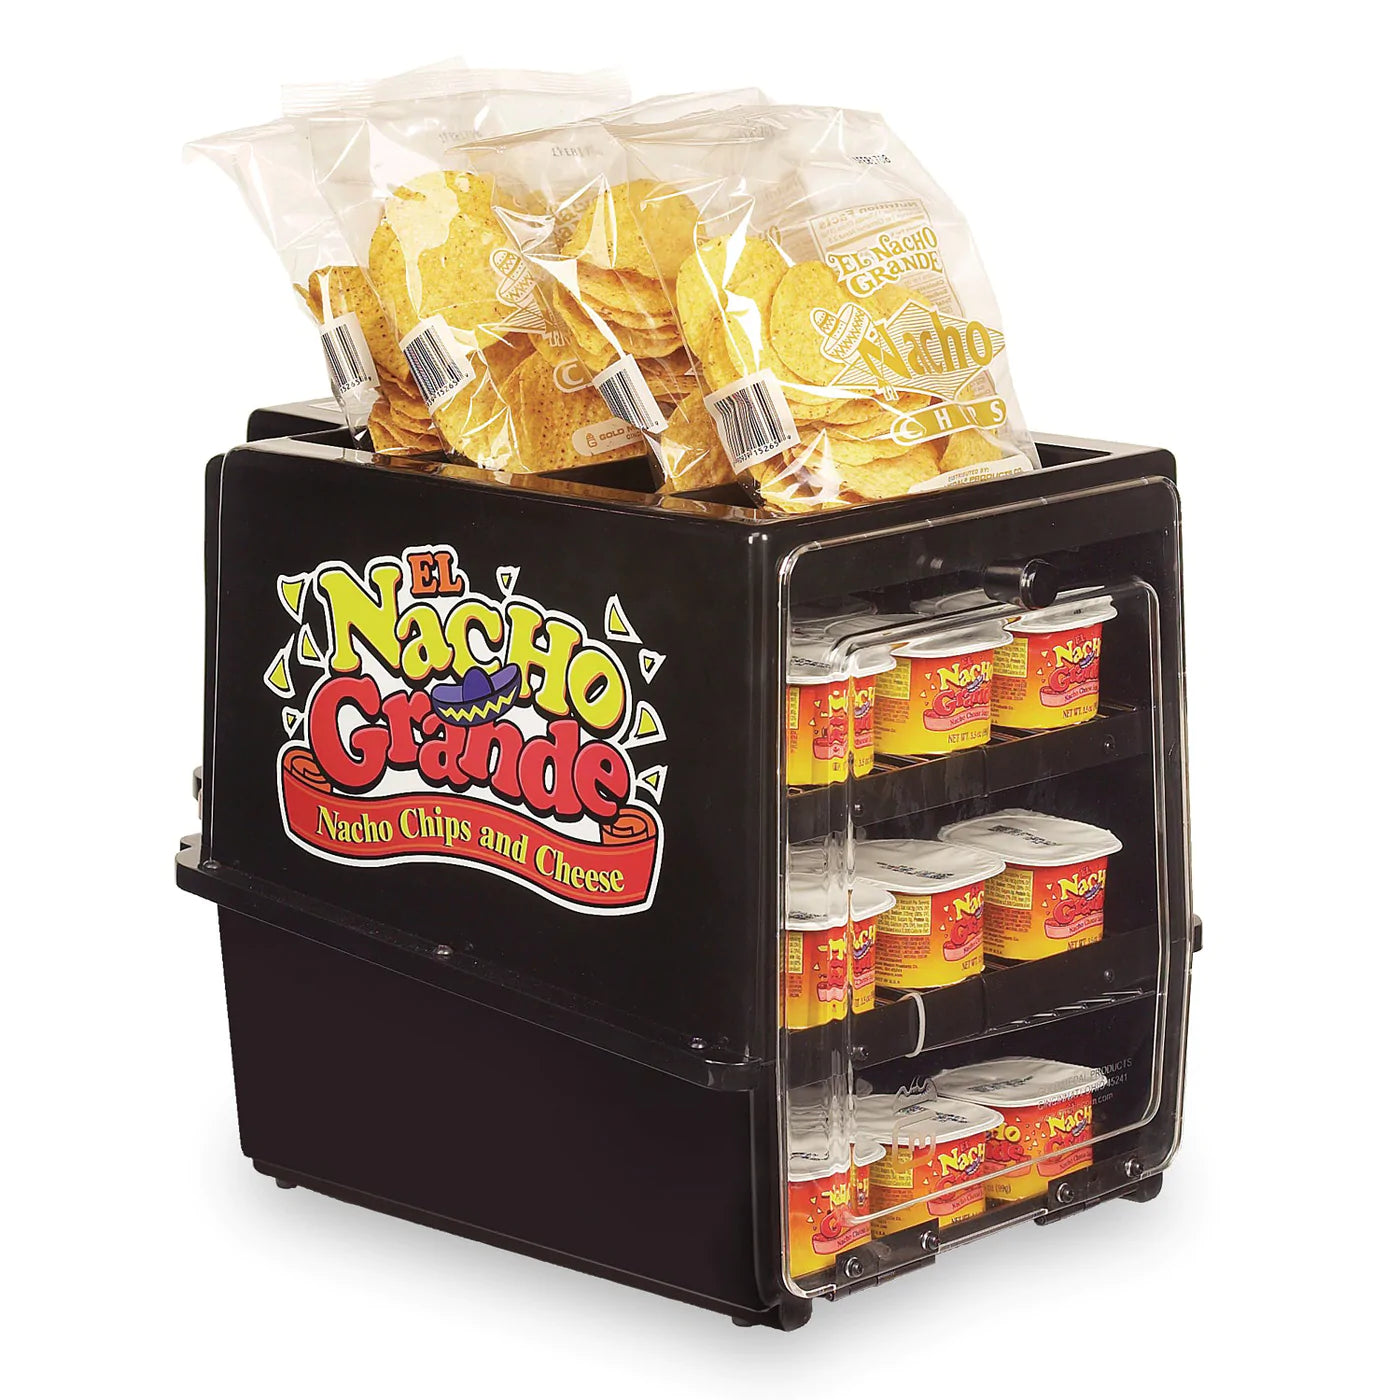 Gold Medal Nacho Cheese Cup Warmer